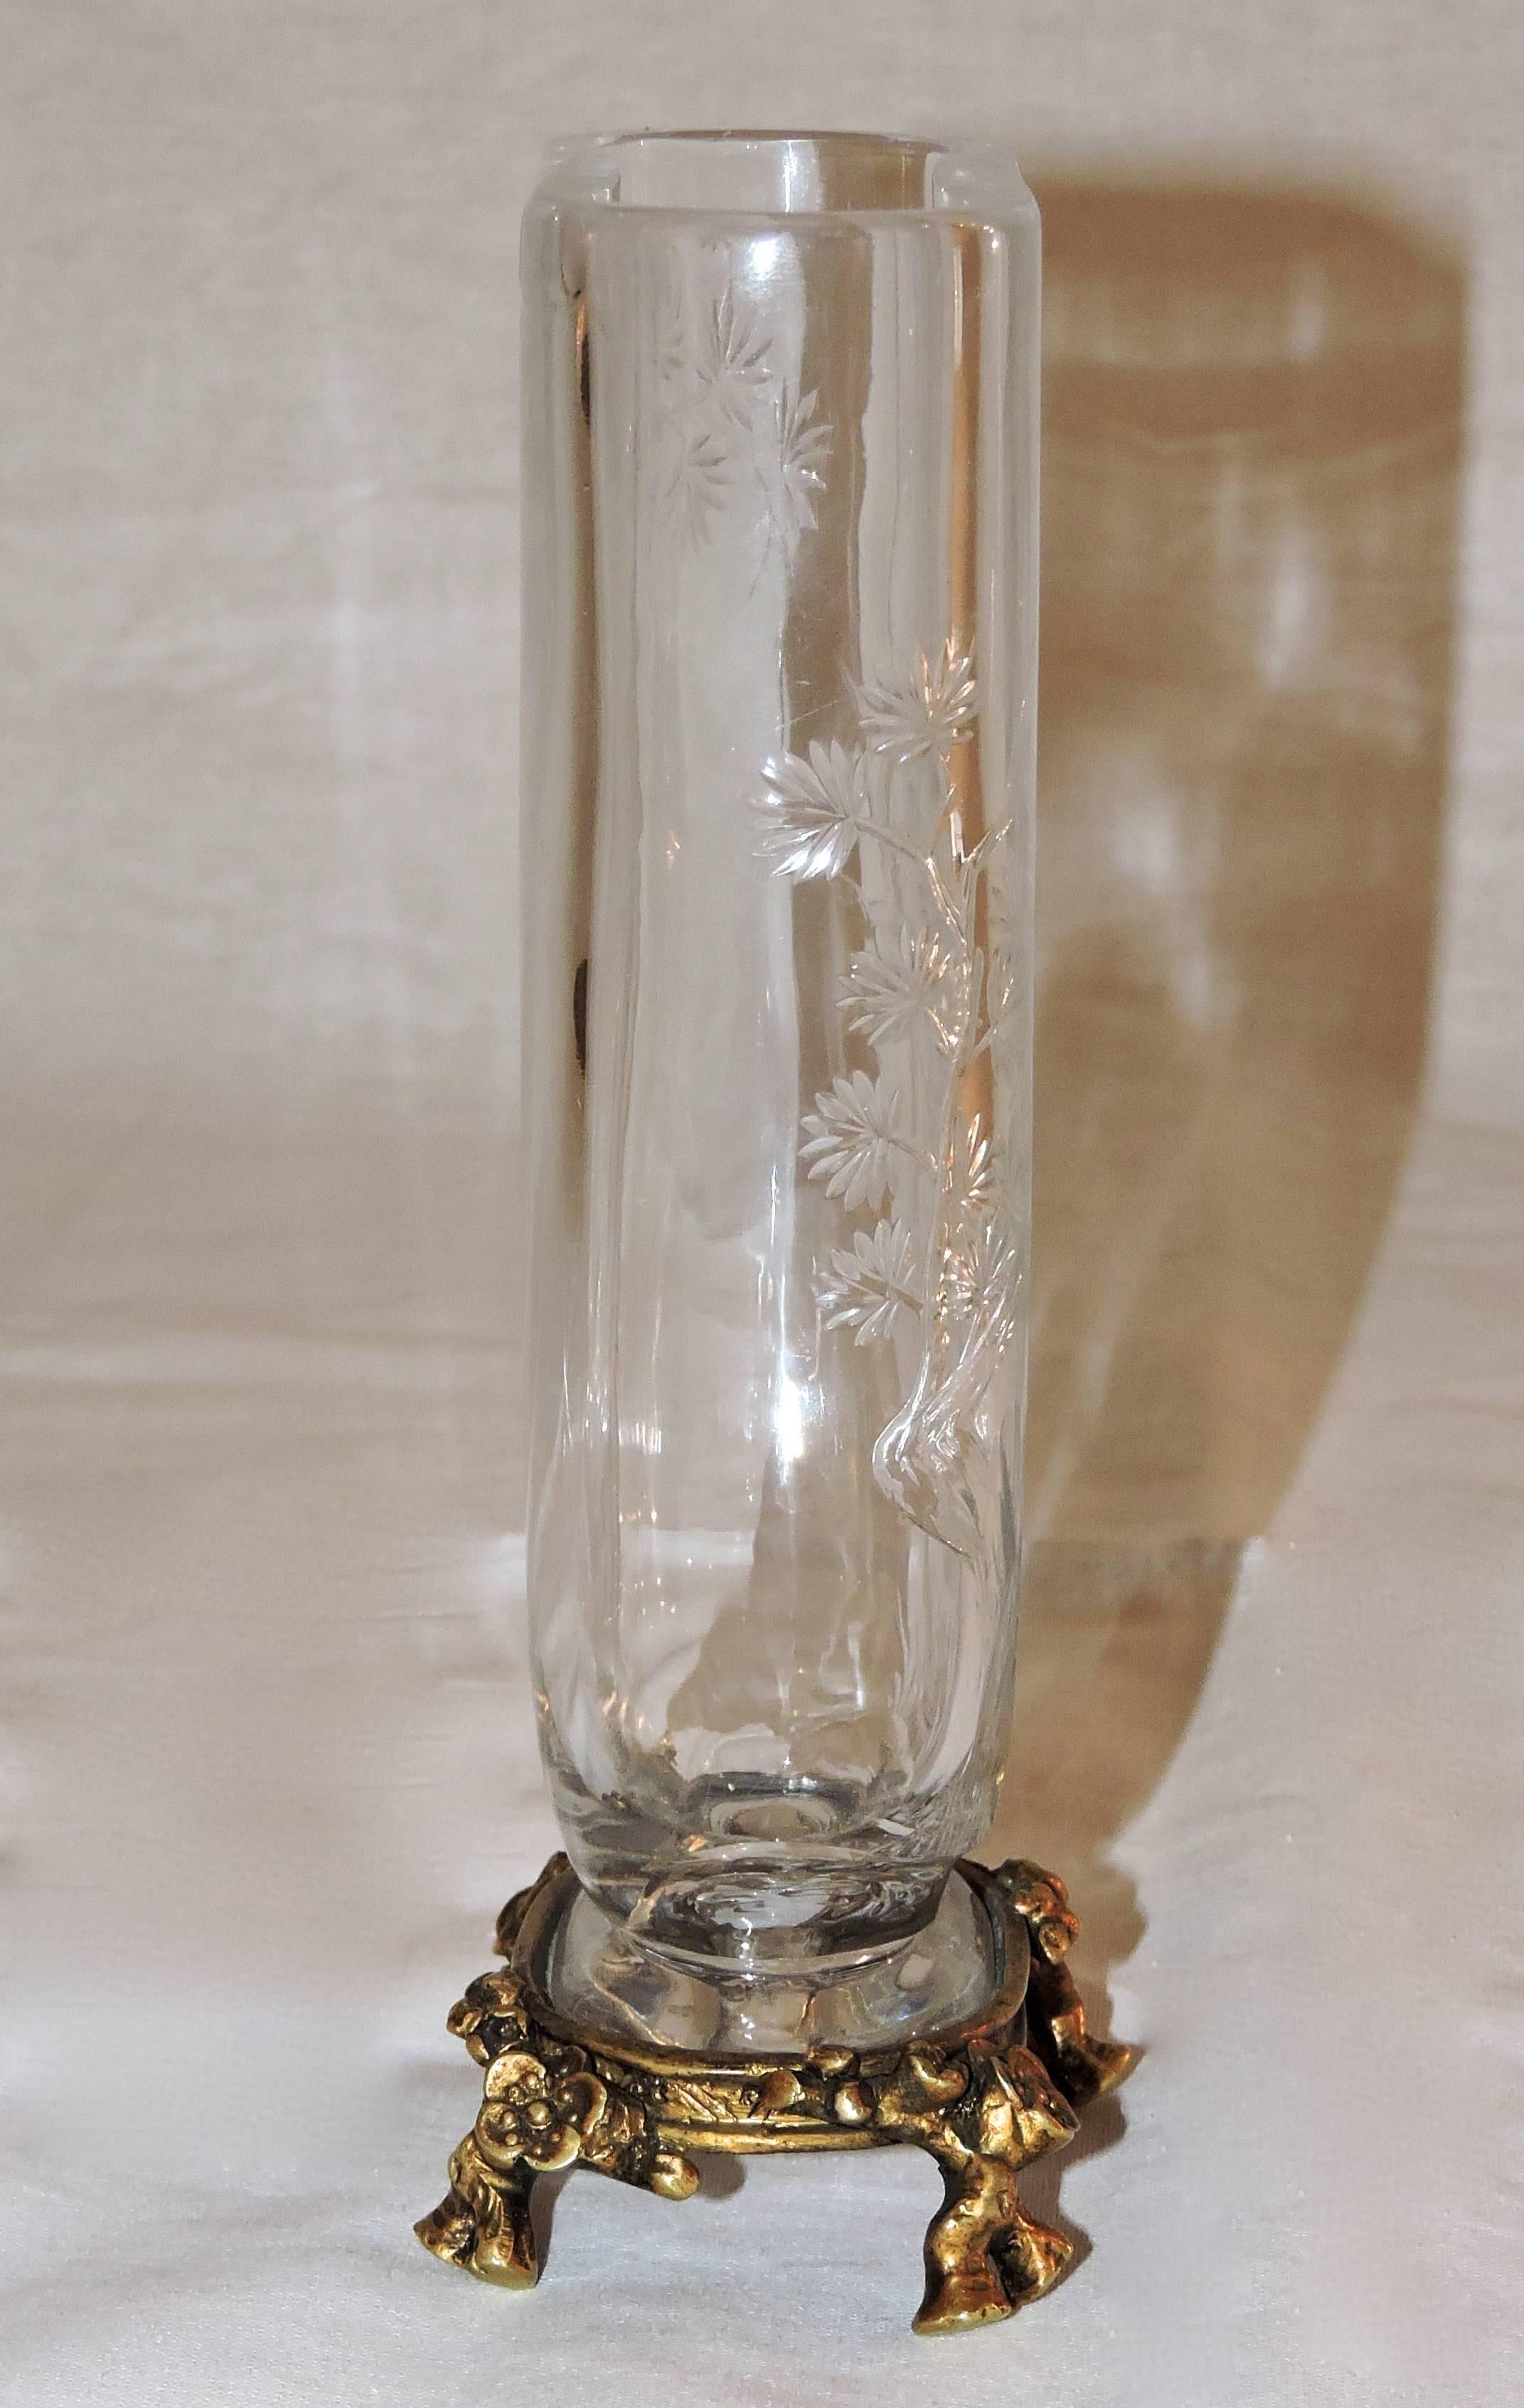 Late 19th Century Japonisme Cutted Crystal Vase Attributed to Maison Baccarat with Ormolu Mount